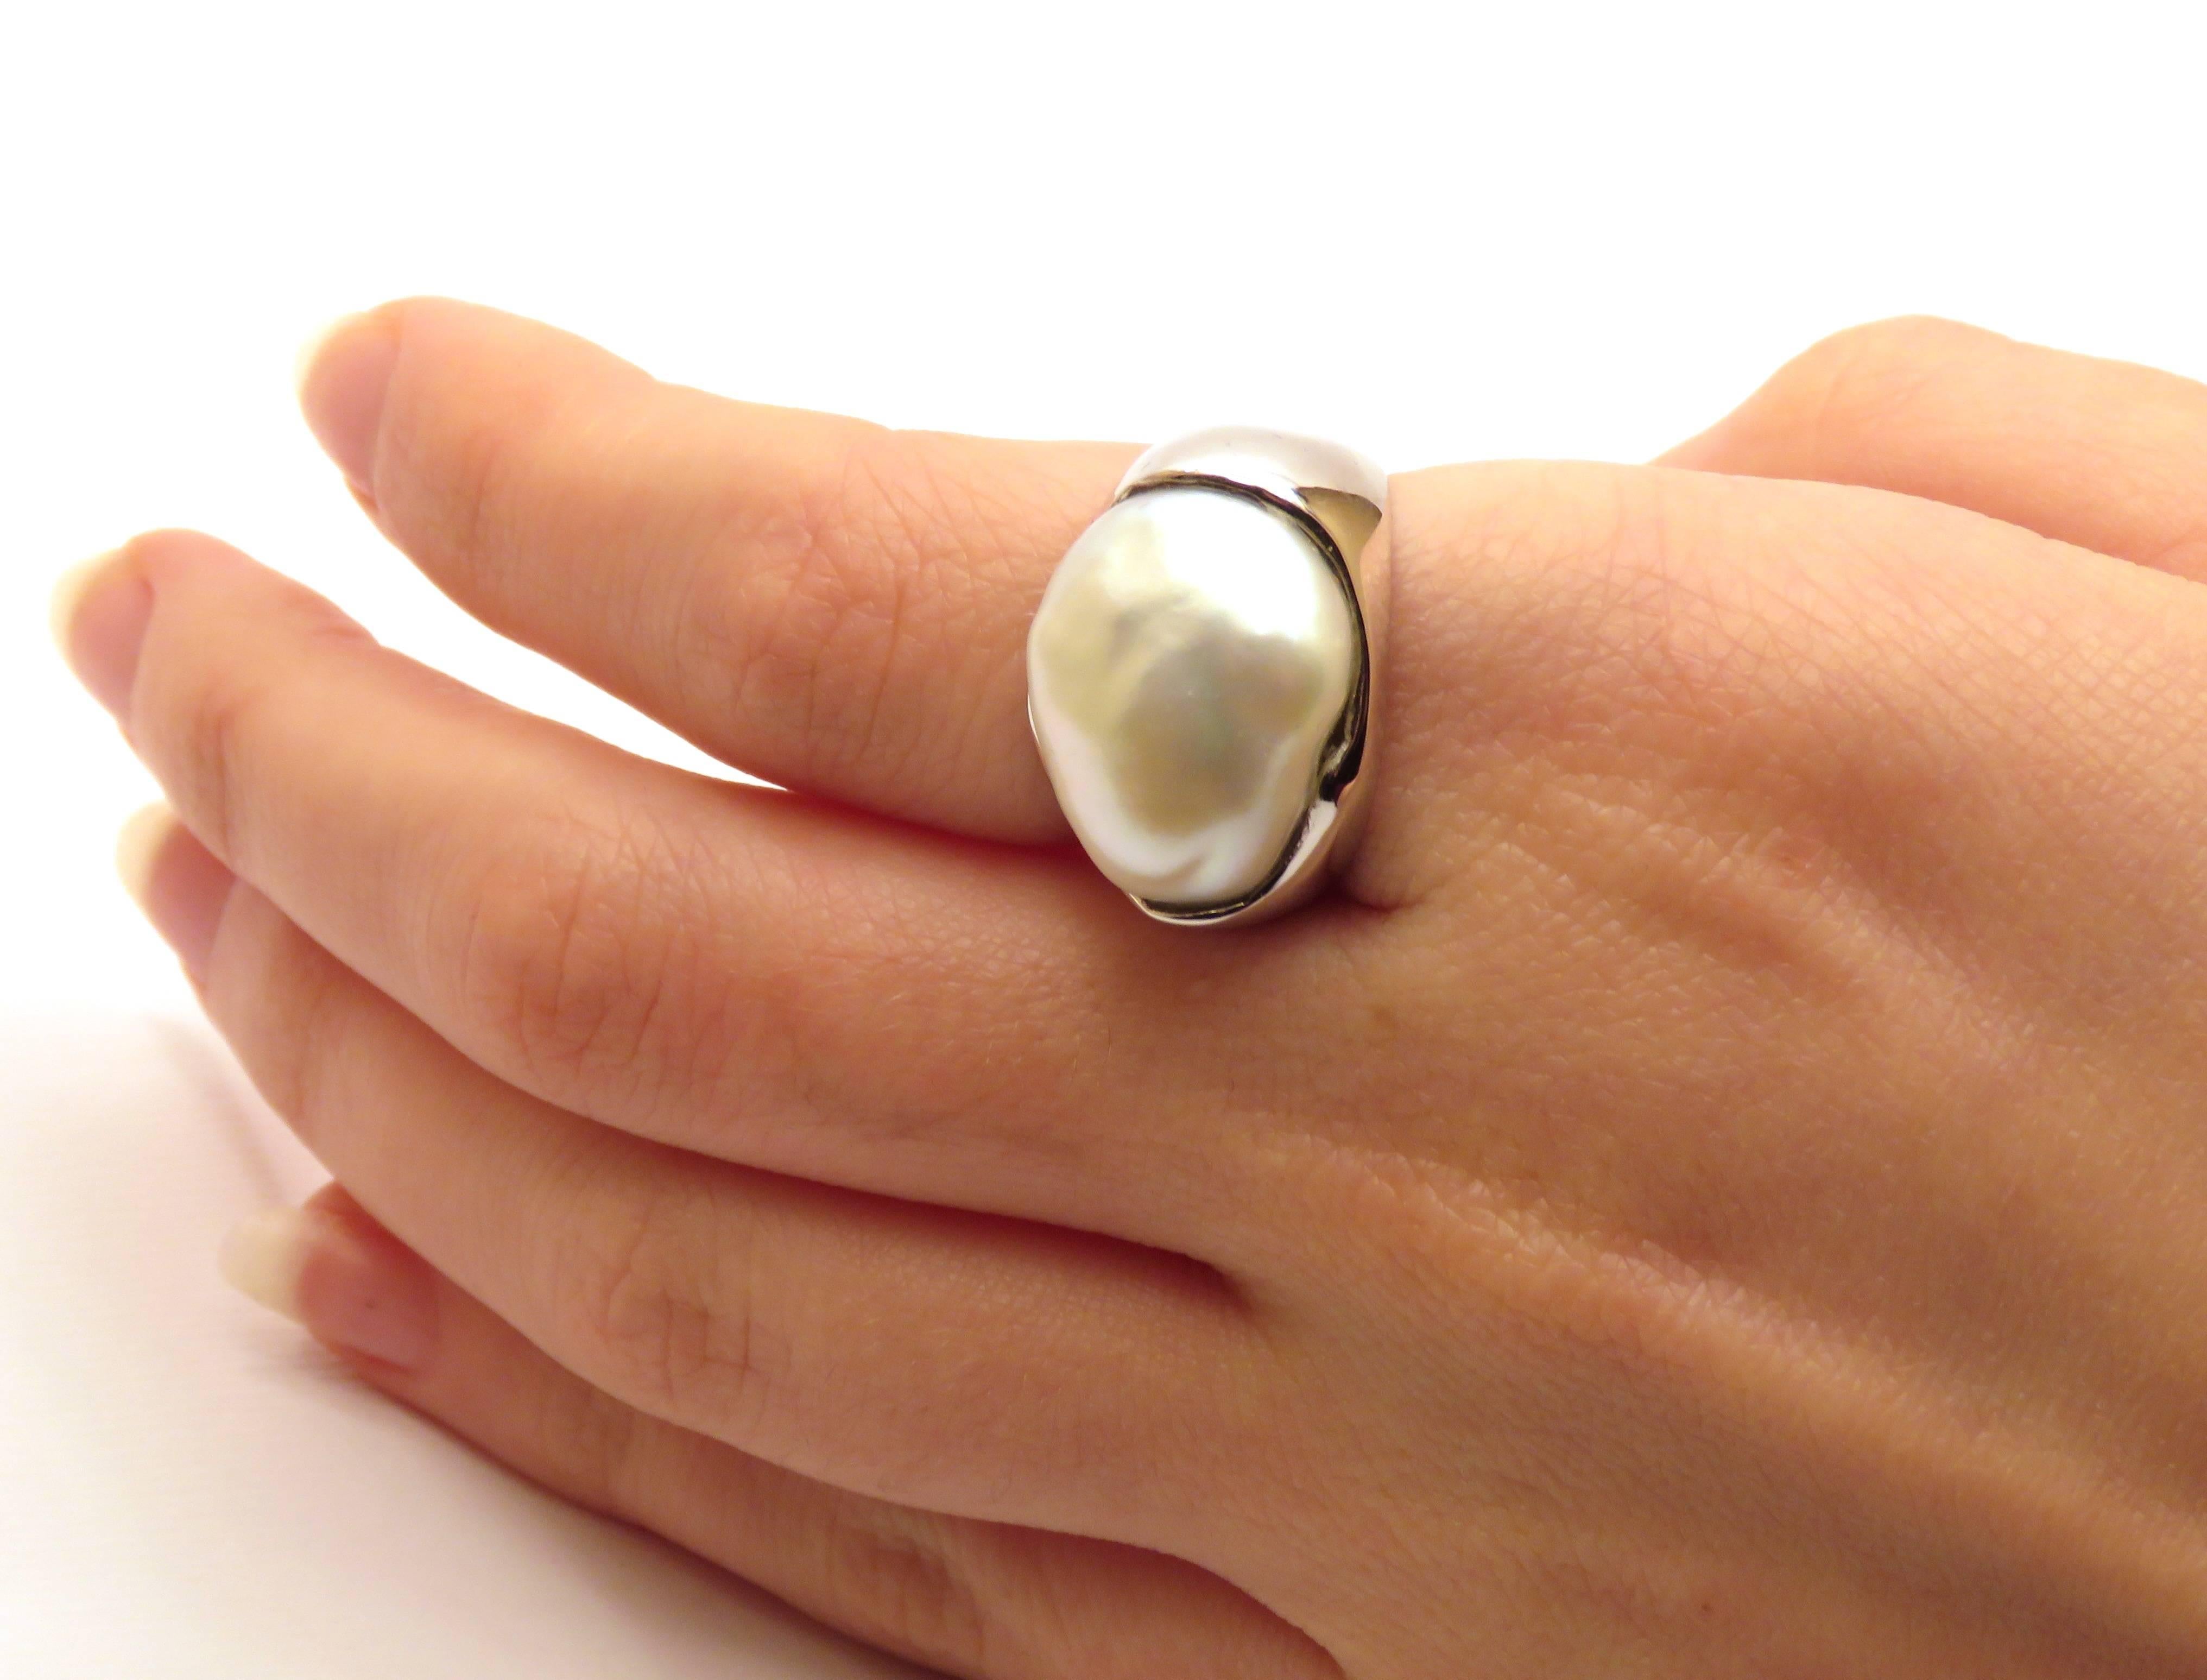 18K white gold ring with freshwater pearl. The pearl size is 18 x 10 millimeters / 0,708 x 0,393 inches.
US finger size is 7 / ITALIAN size is 14 / FRANCH size is 54 / Can be resized.
It  is marked with the Italian Gold Mark 750 and Botta Gioielli